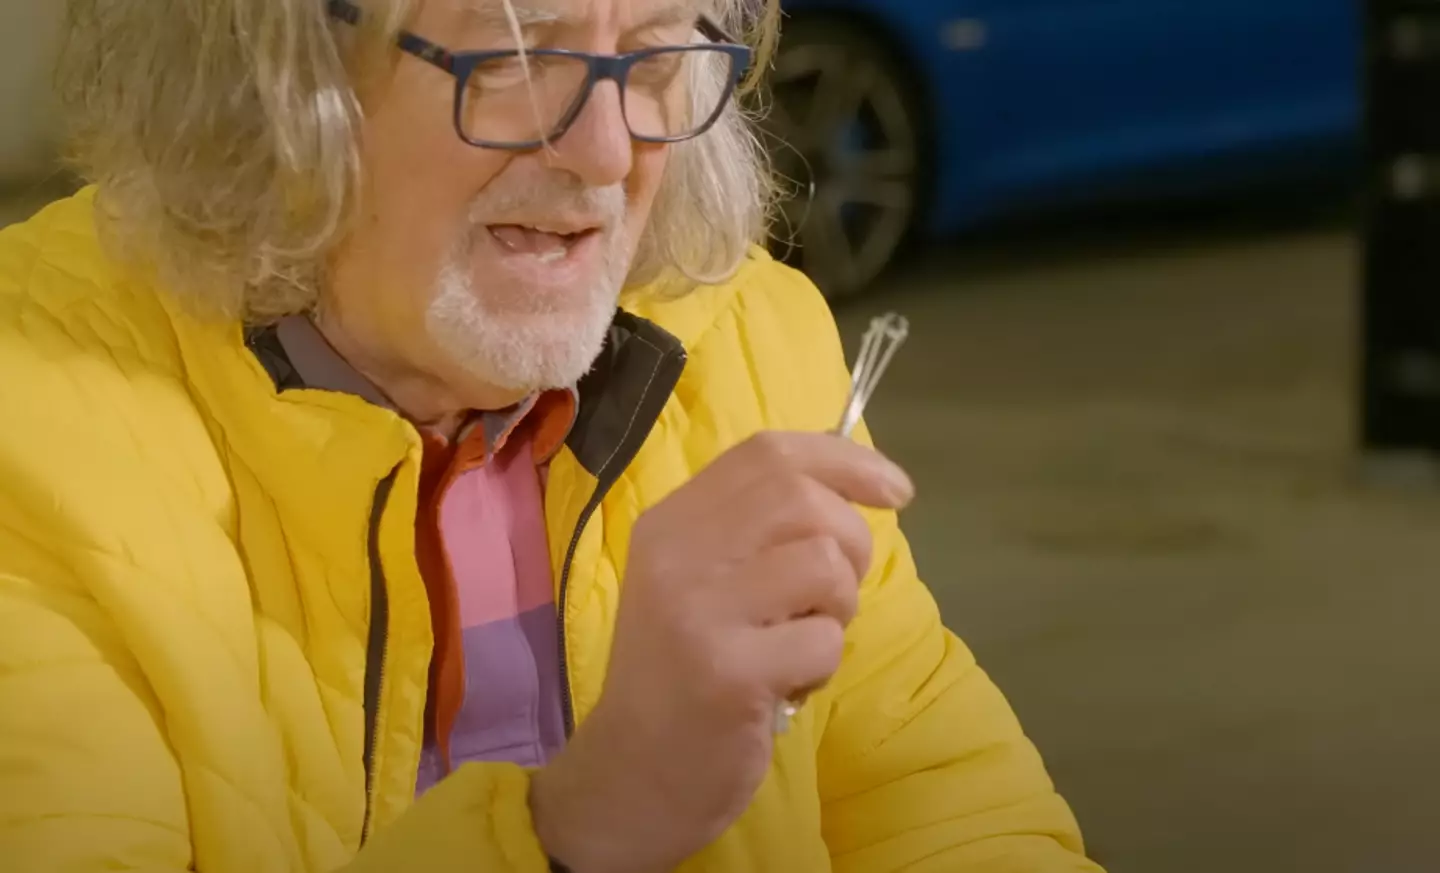 Nail clippers are important to the former Top Gear presenter.